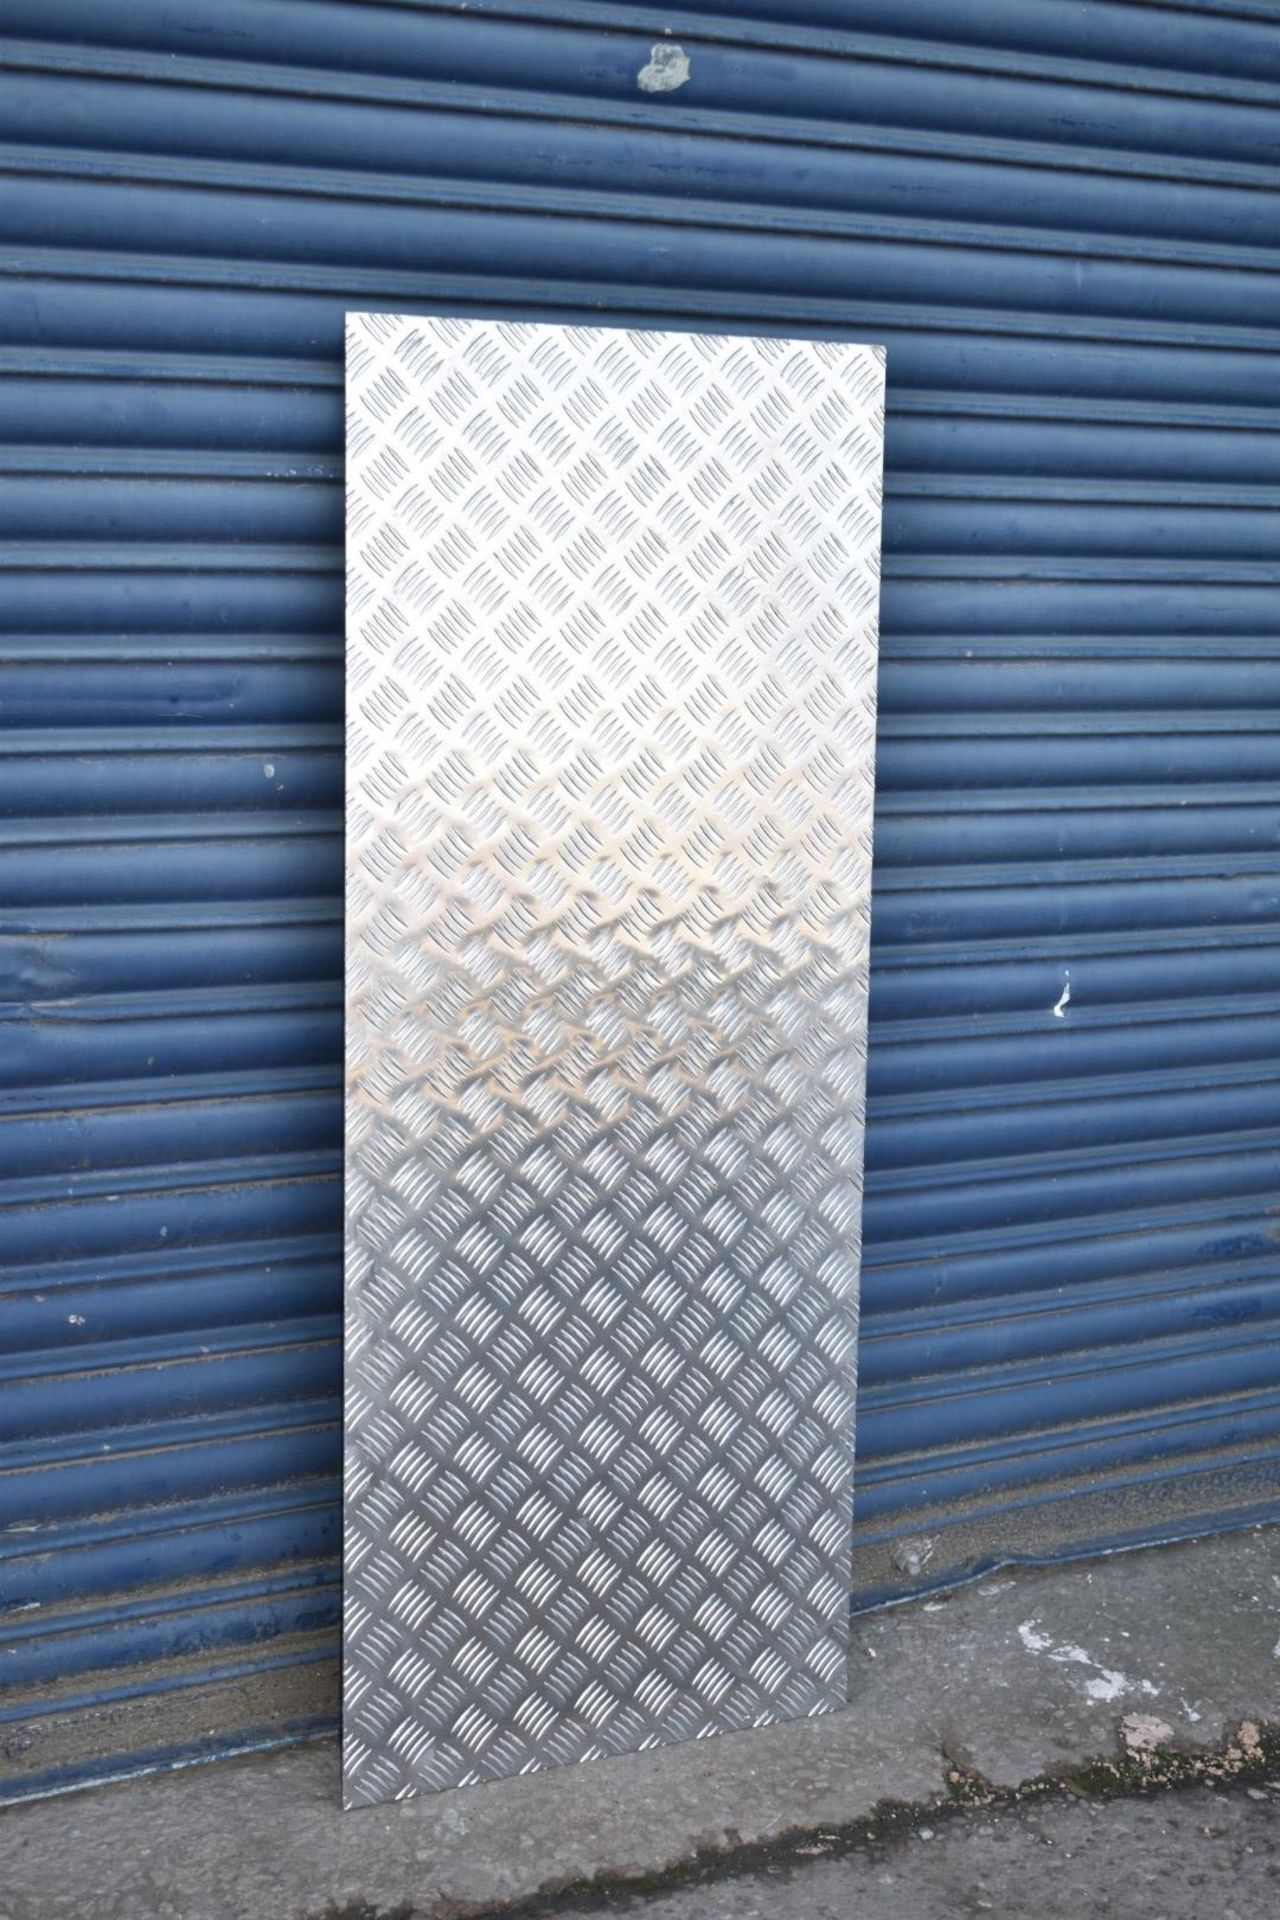 1 x Aluminium Tread Checker Plate - Size 125 x 50.5 x 0.3 cms - None Slip Floor Plate Suitable For - Image 4 of 8